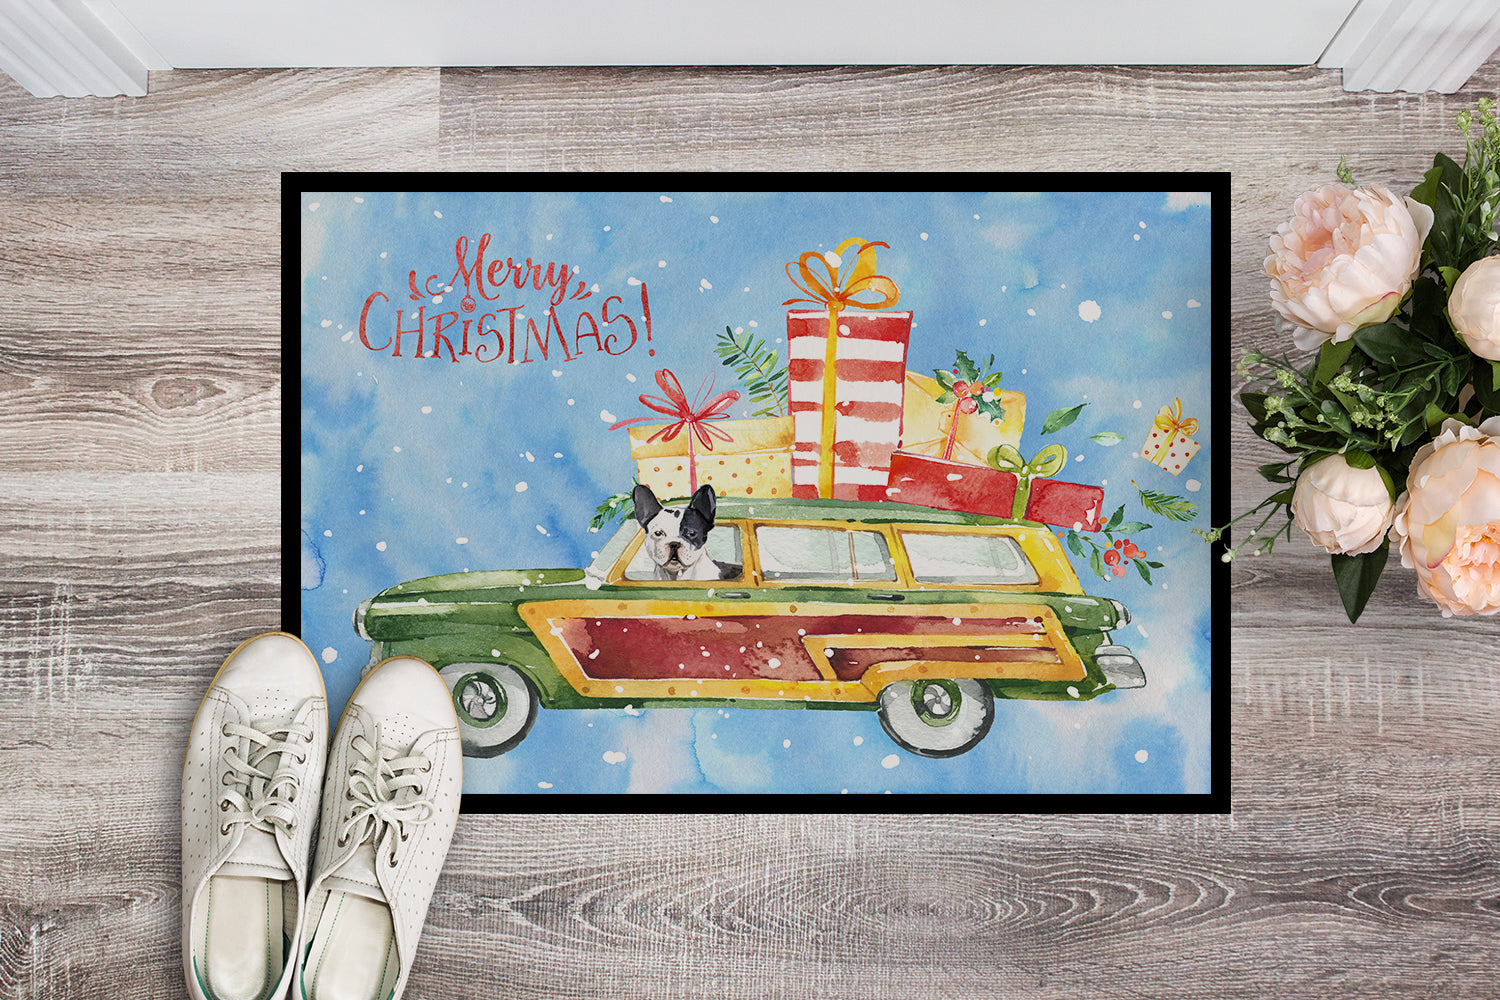 Merry Christmas French Bulldog Indoor or Outdoor Mat 18x27 CK2444MAT - the-store.com